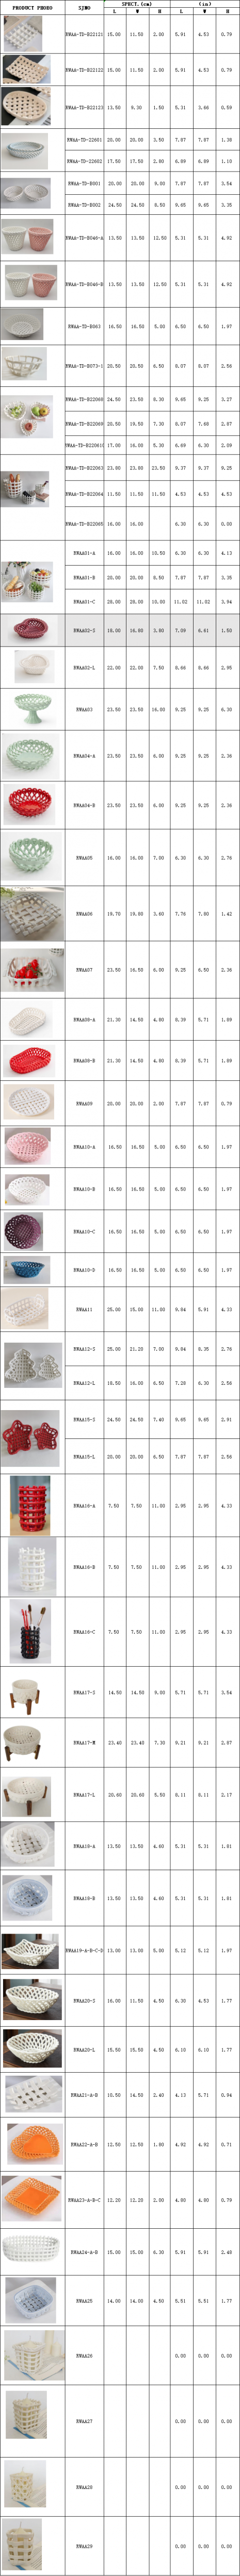 Hand-woven ceramic products